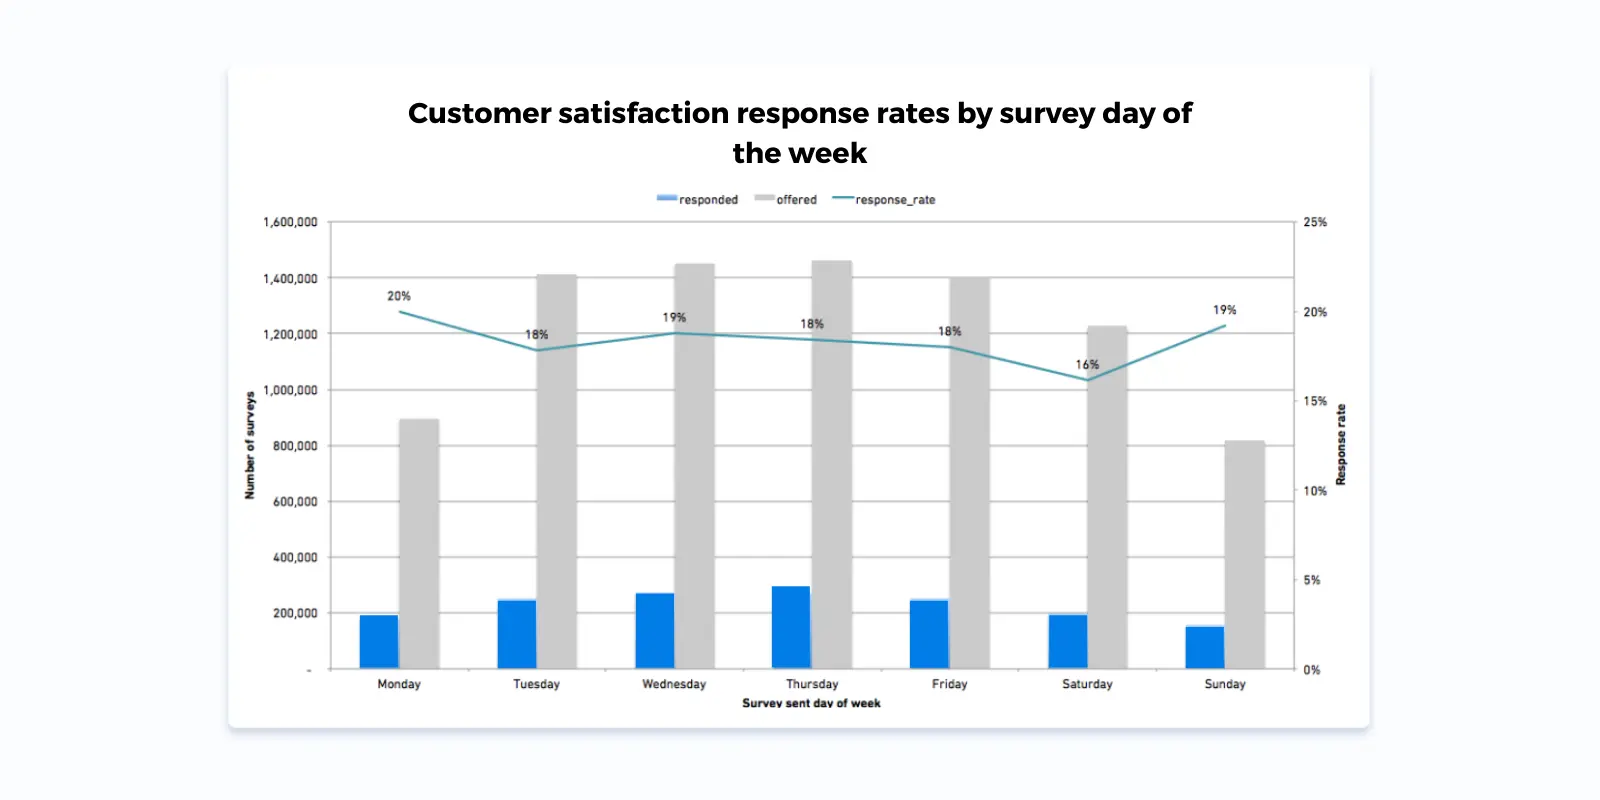 Customer satisfaction response rates by survey day of the week